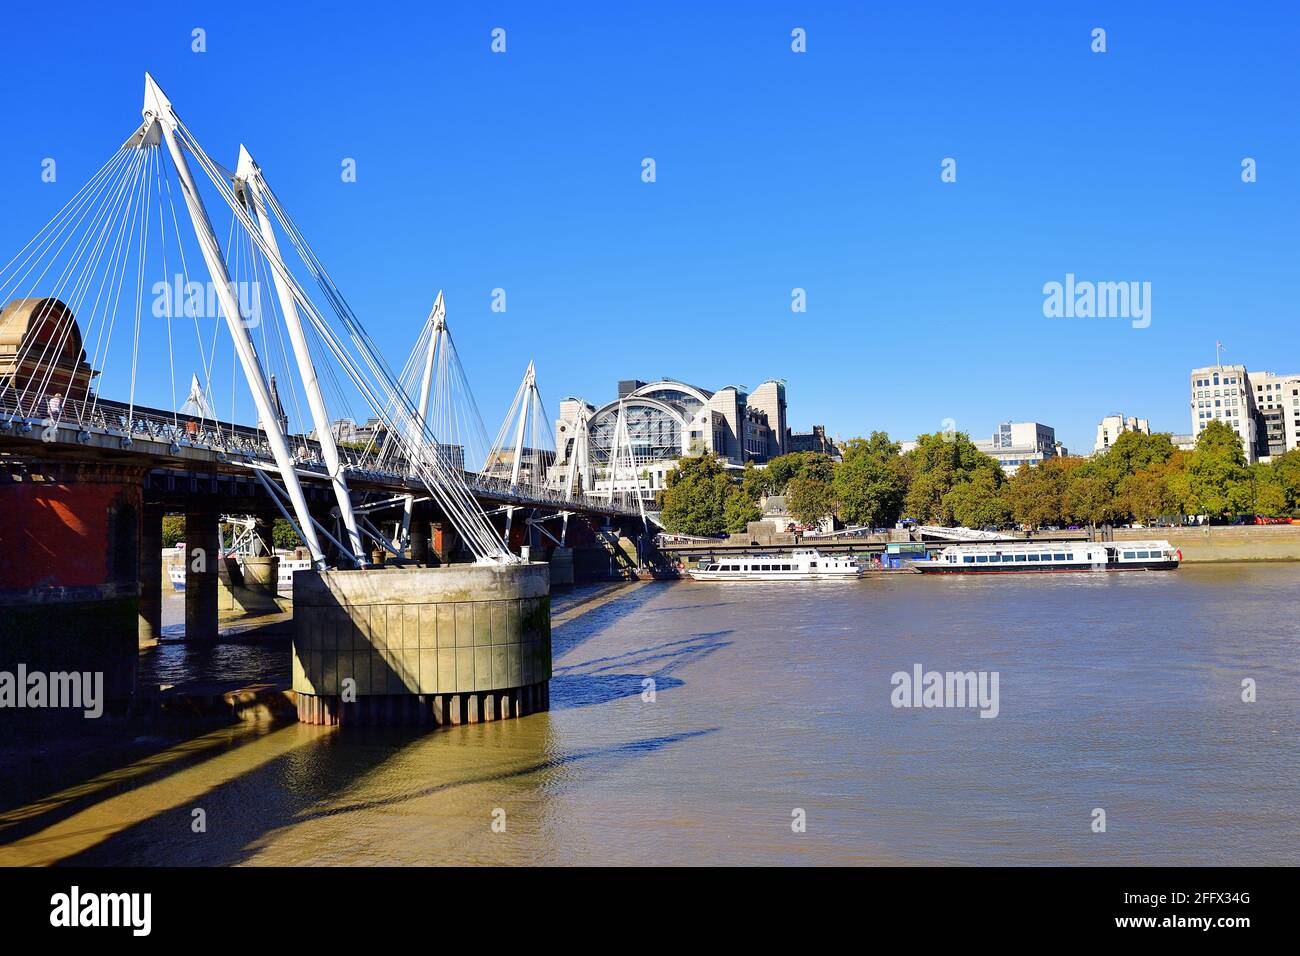 London, England, United Kingdom. Boats tied up at piers along the Embankment sit stationary in the River Thames next to the Golden Jubilee Bridge. Stock Photo